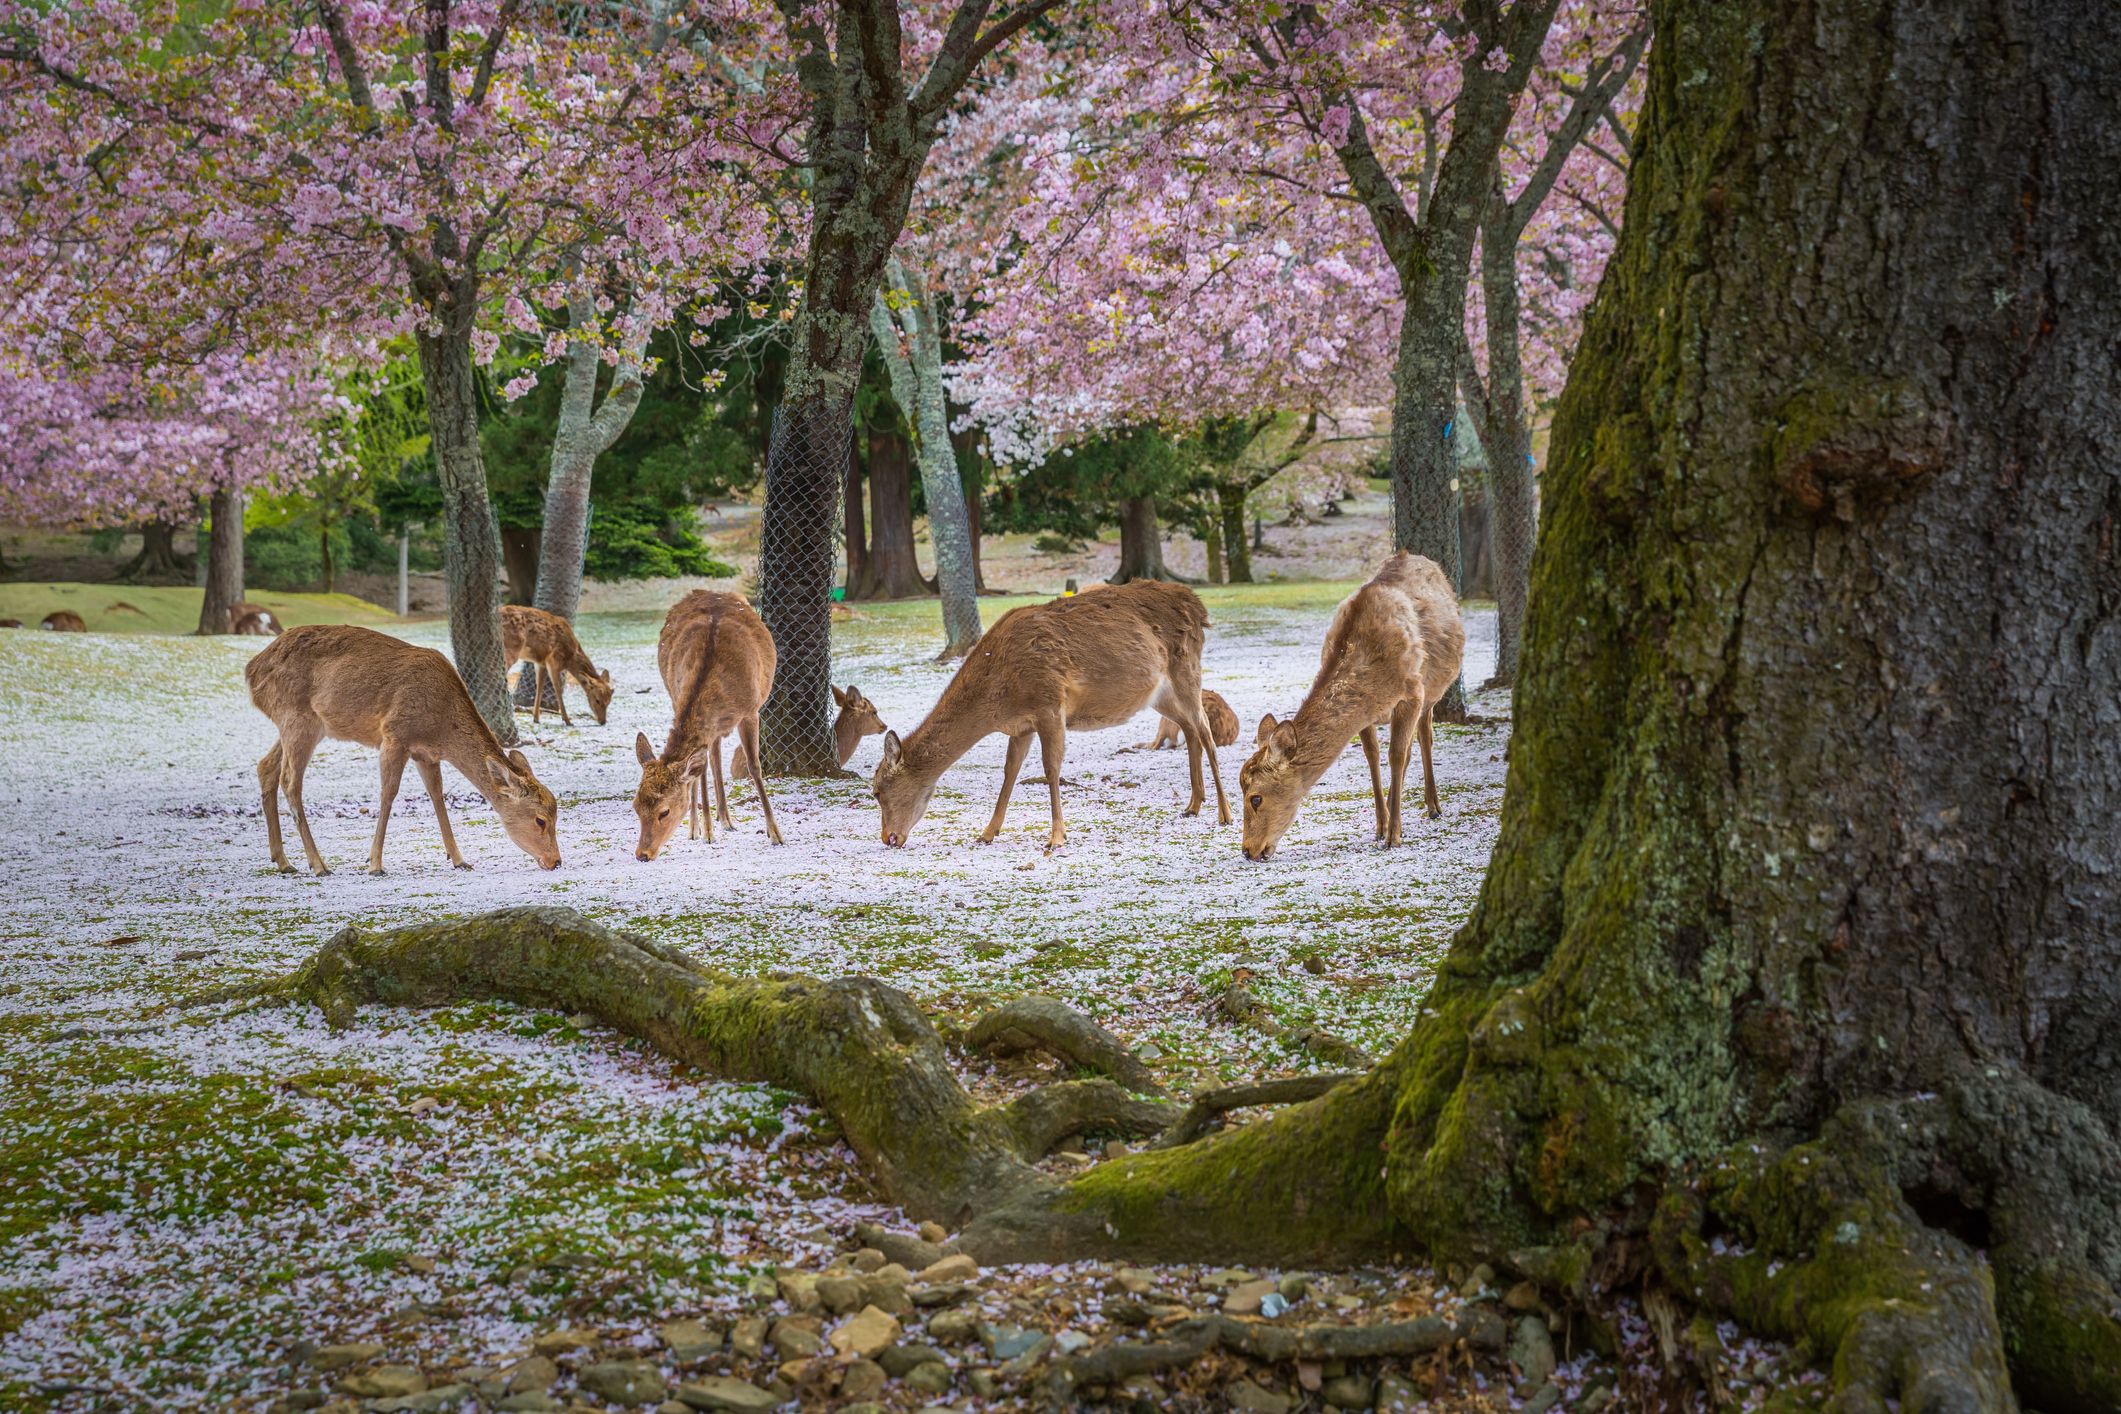  Deer relax under cherry blossom trees in beautiful video 